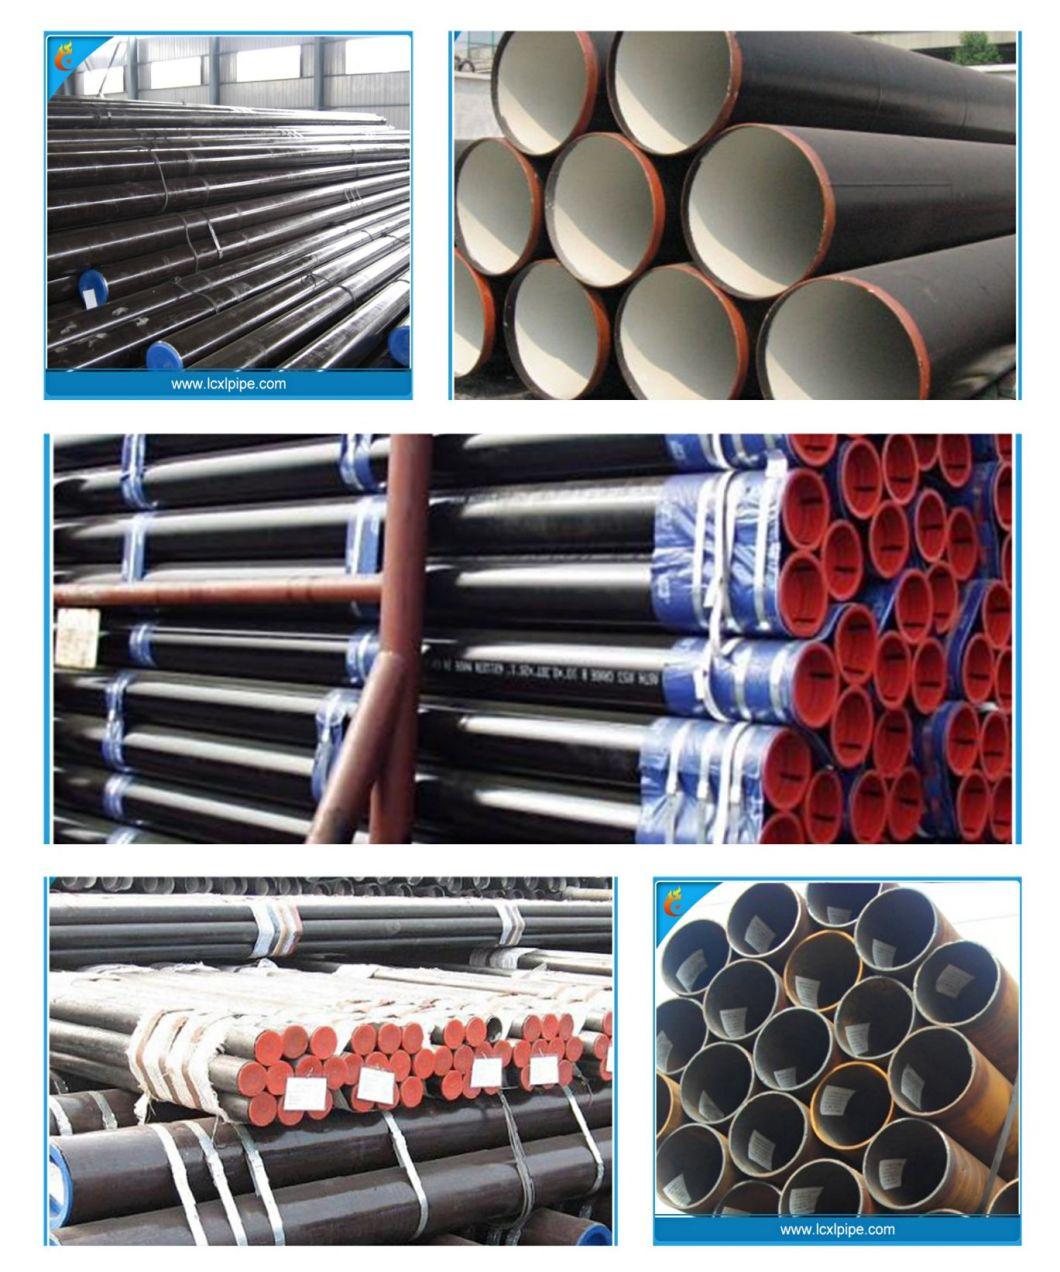 Stainless Steel Tube for Heat Exchanger Tubes Pipes 304L 316L 304